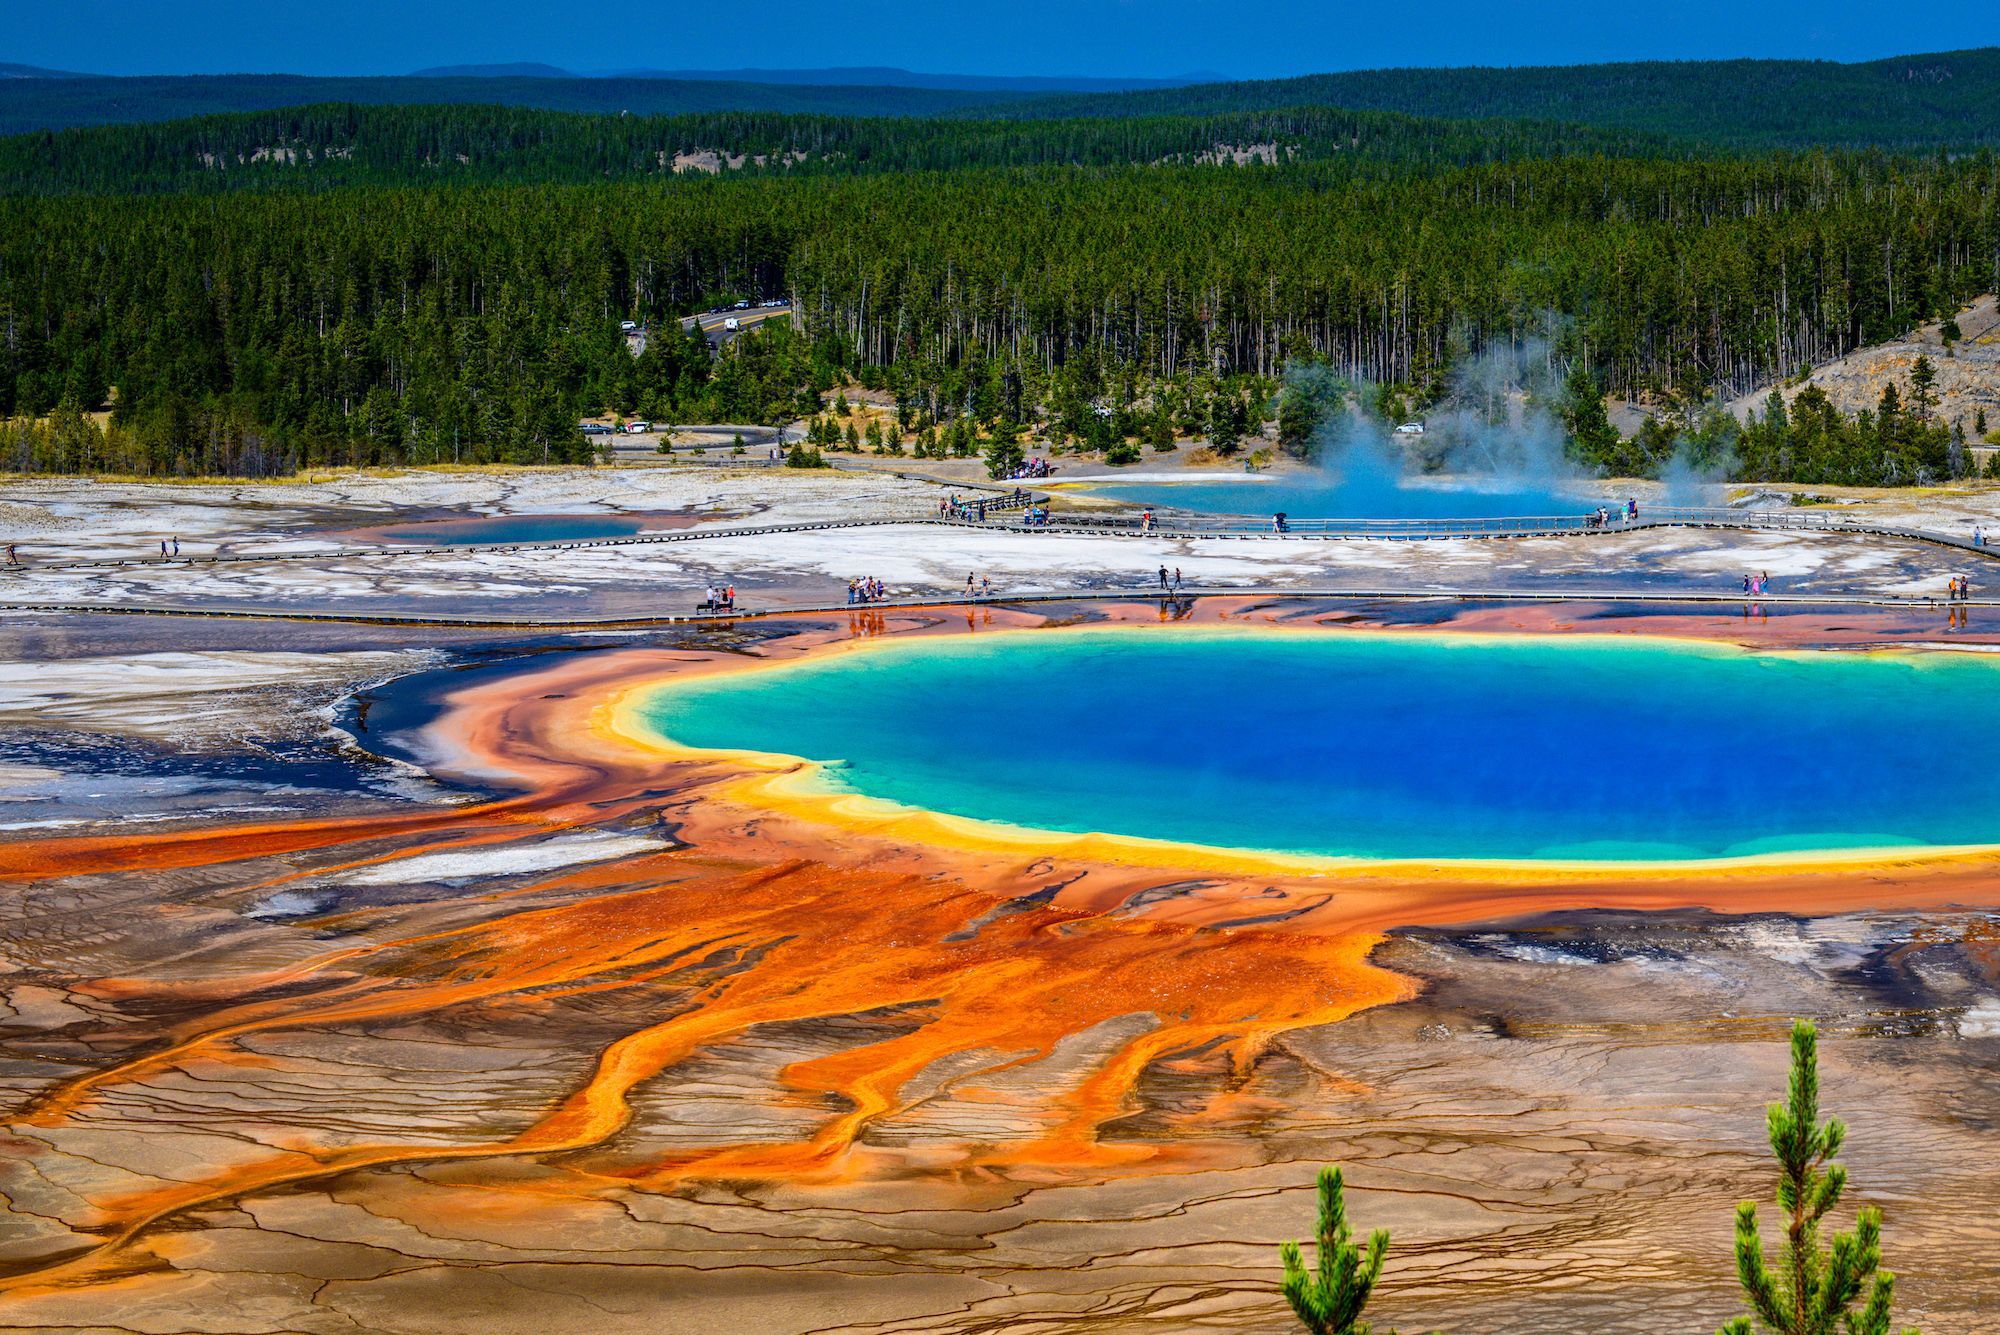 Explore Yellowstone National Park | National Geographic Society